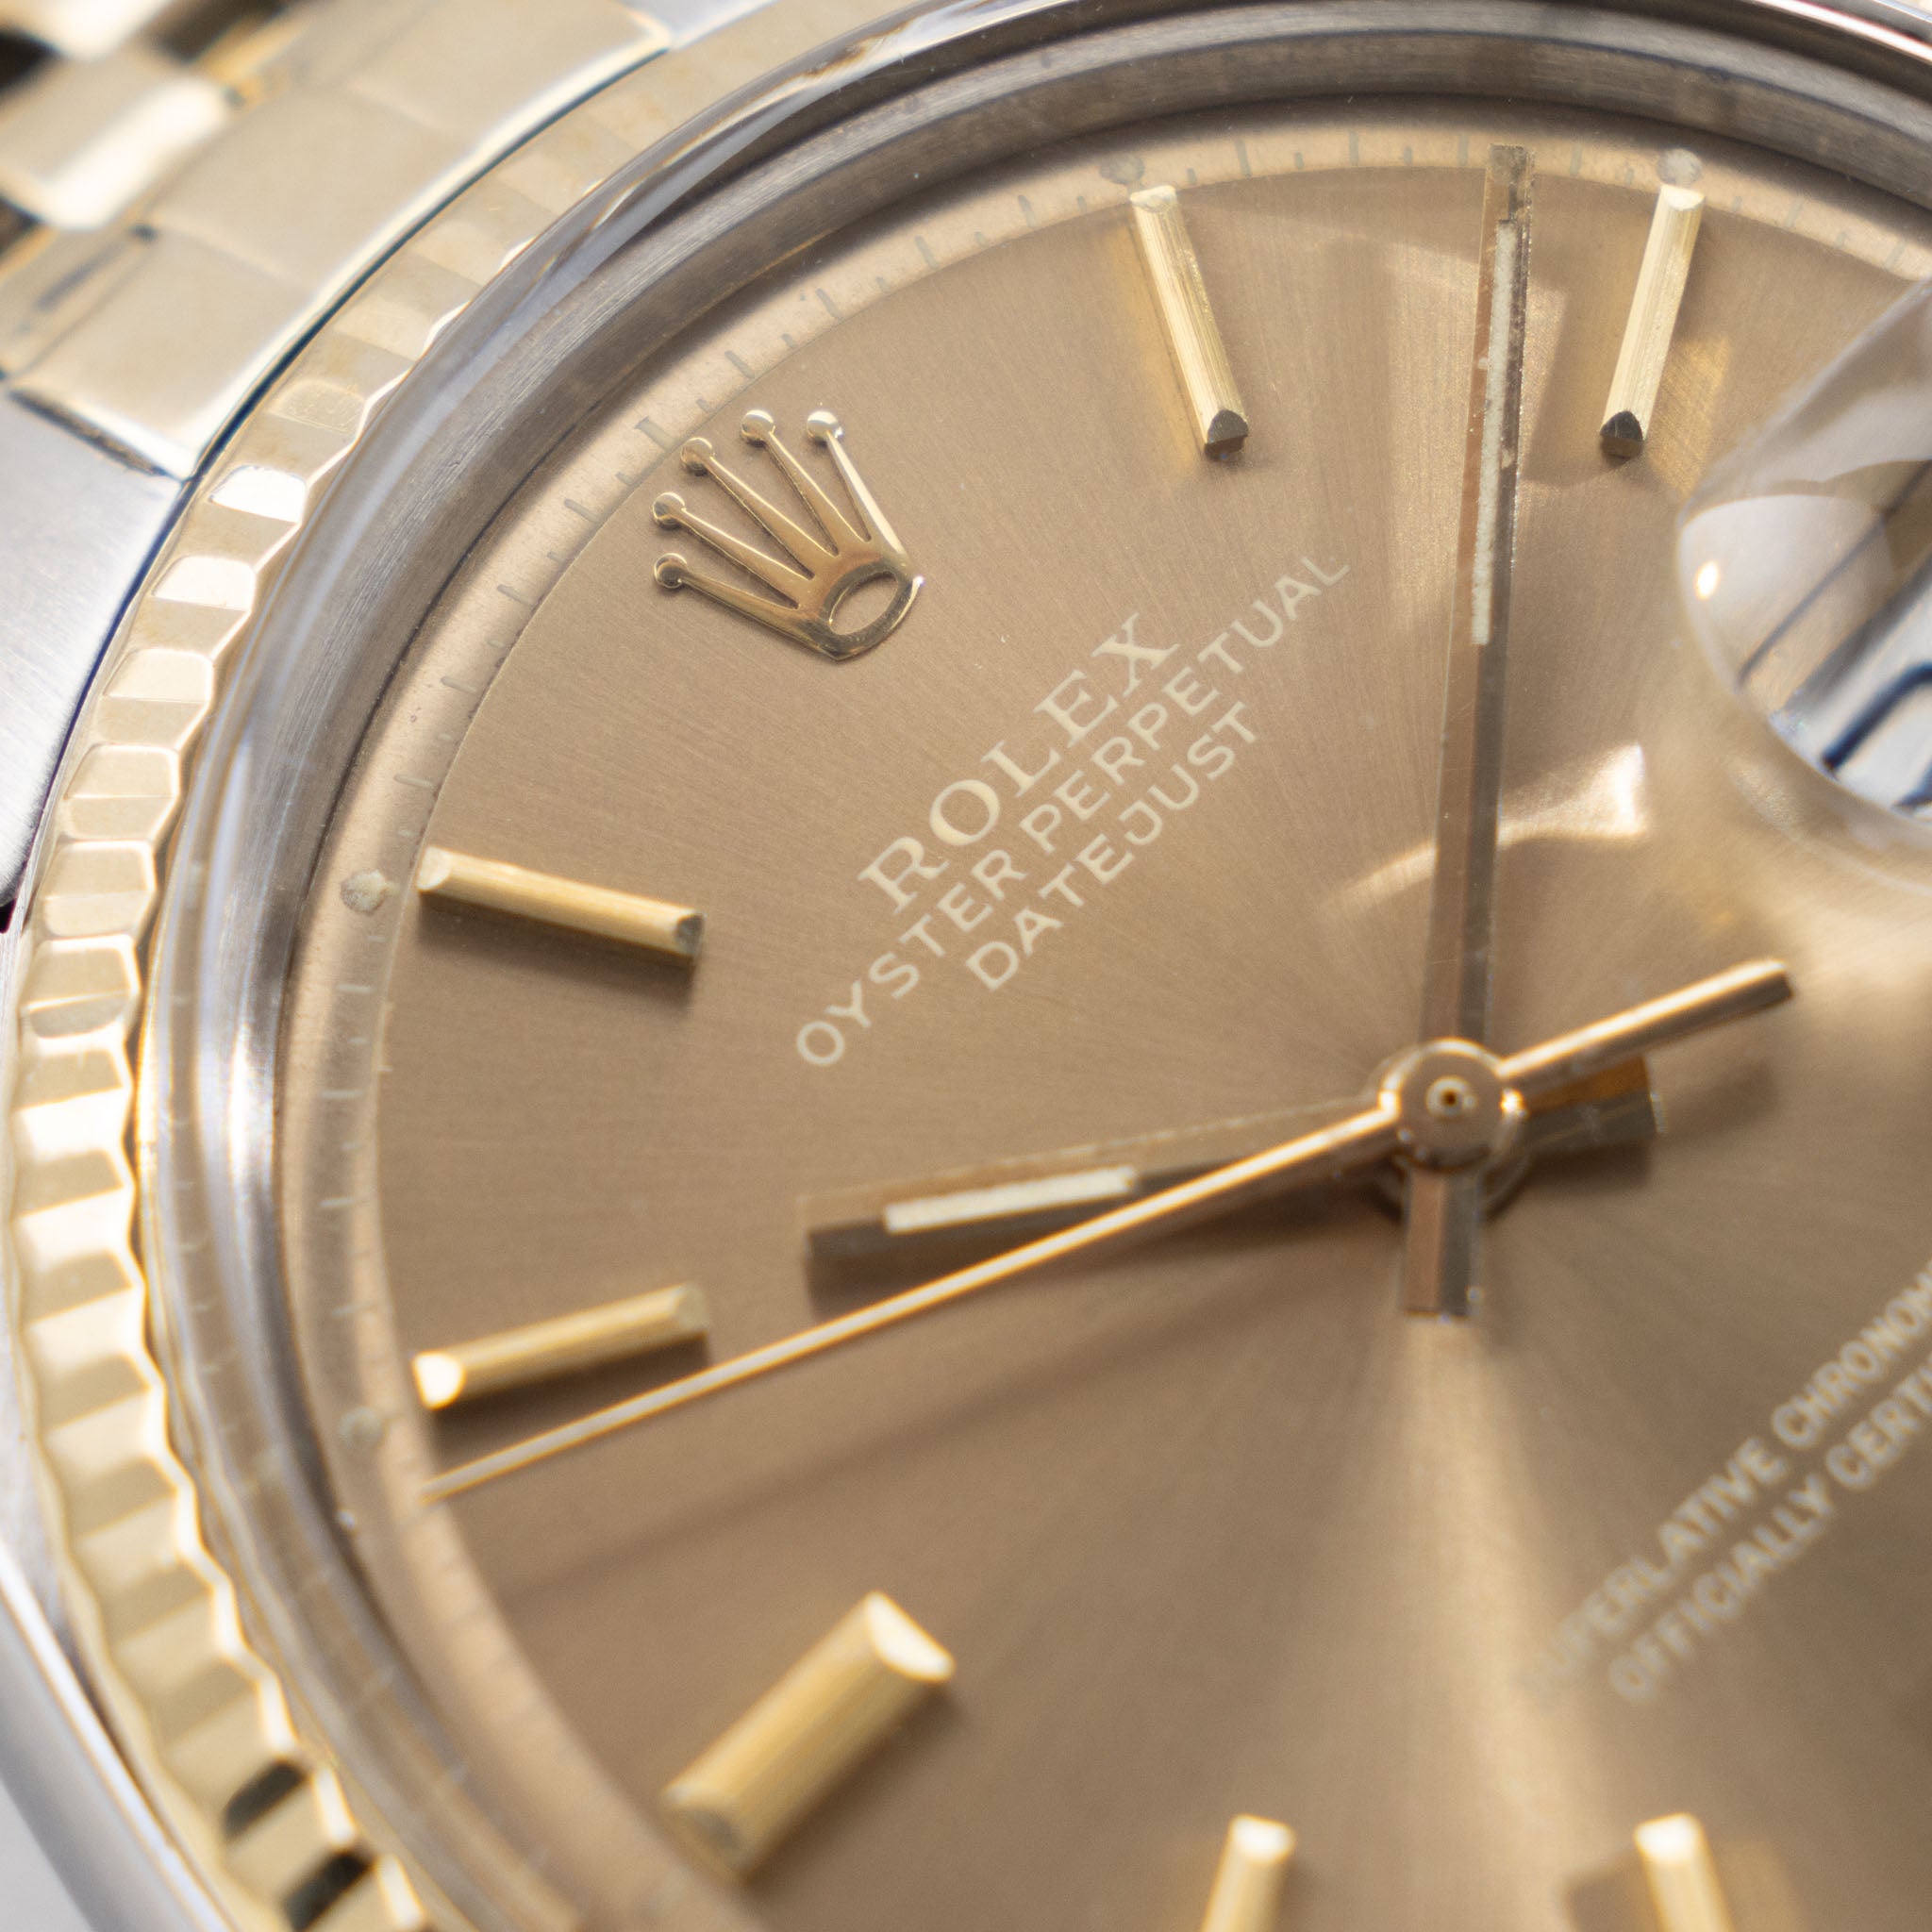 Rolex Datejust Steel and Gold Cappuccino Dial Ref 1601